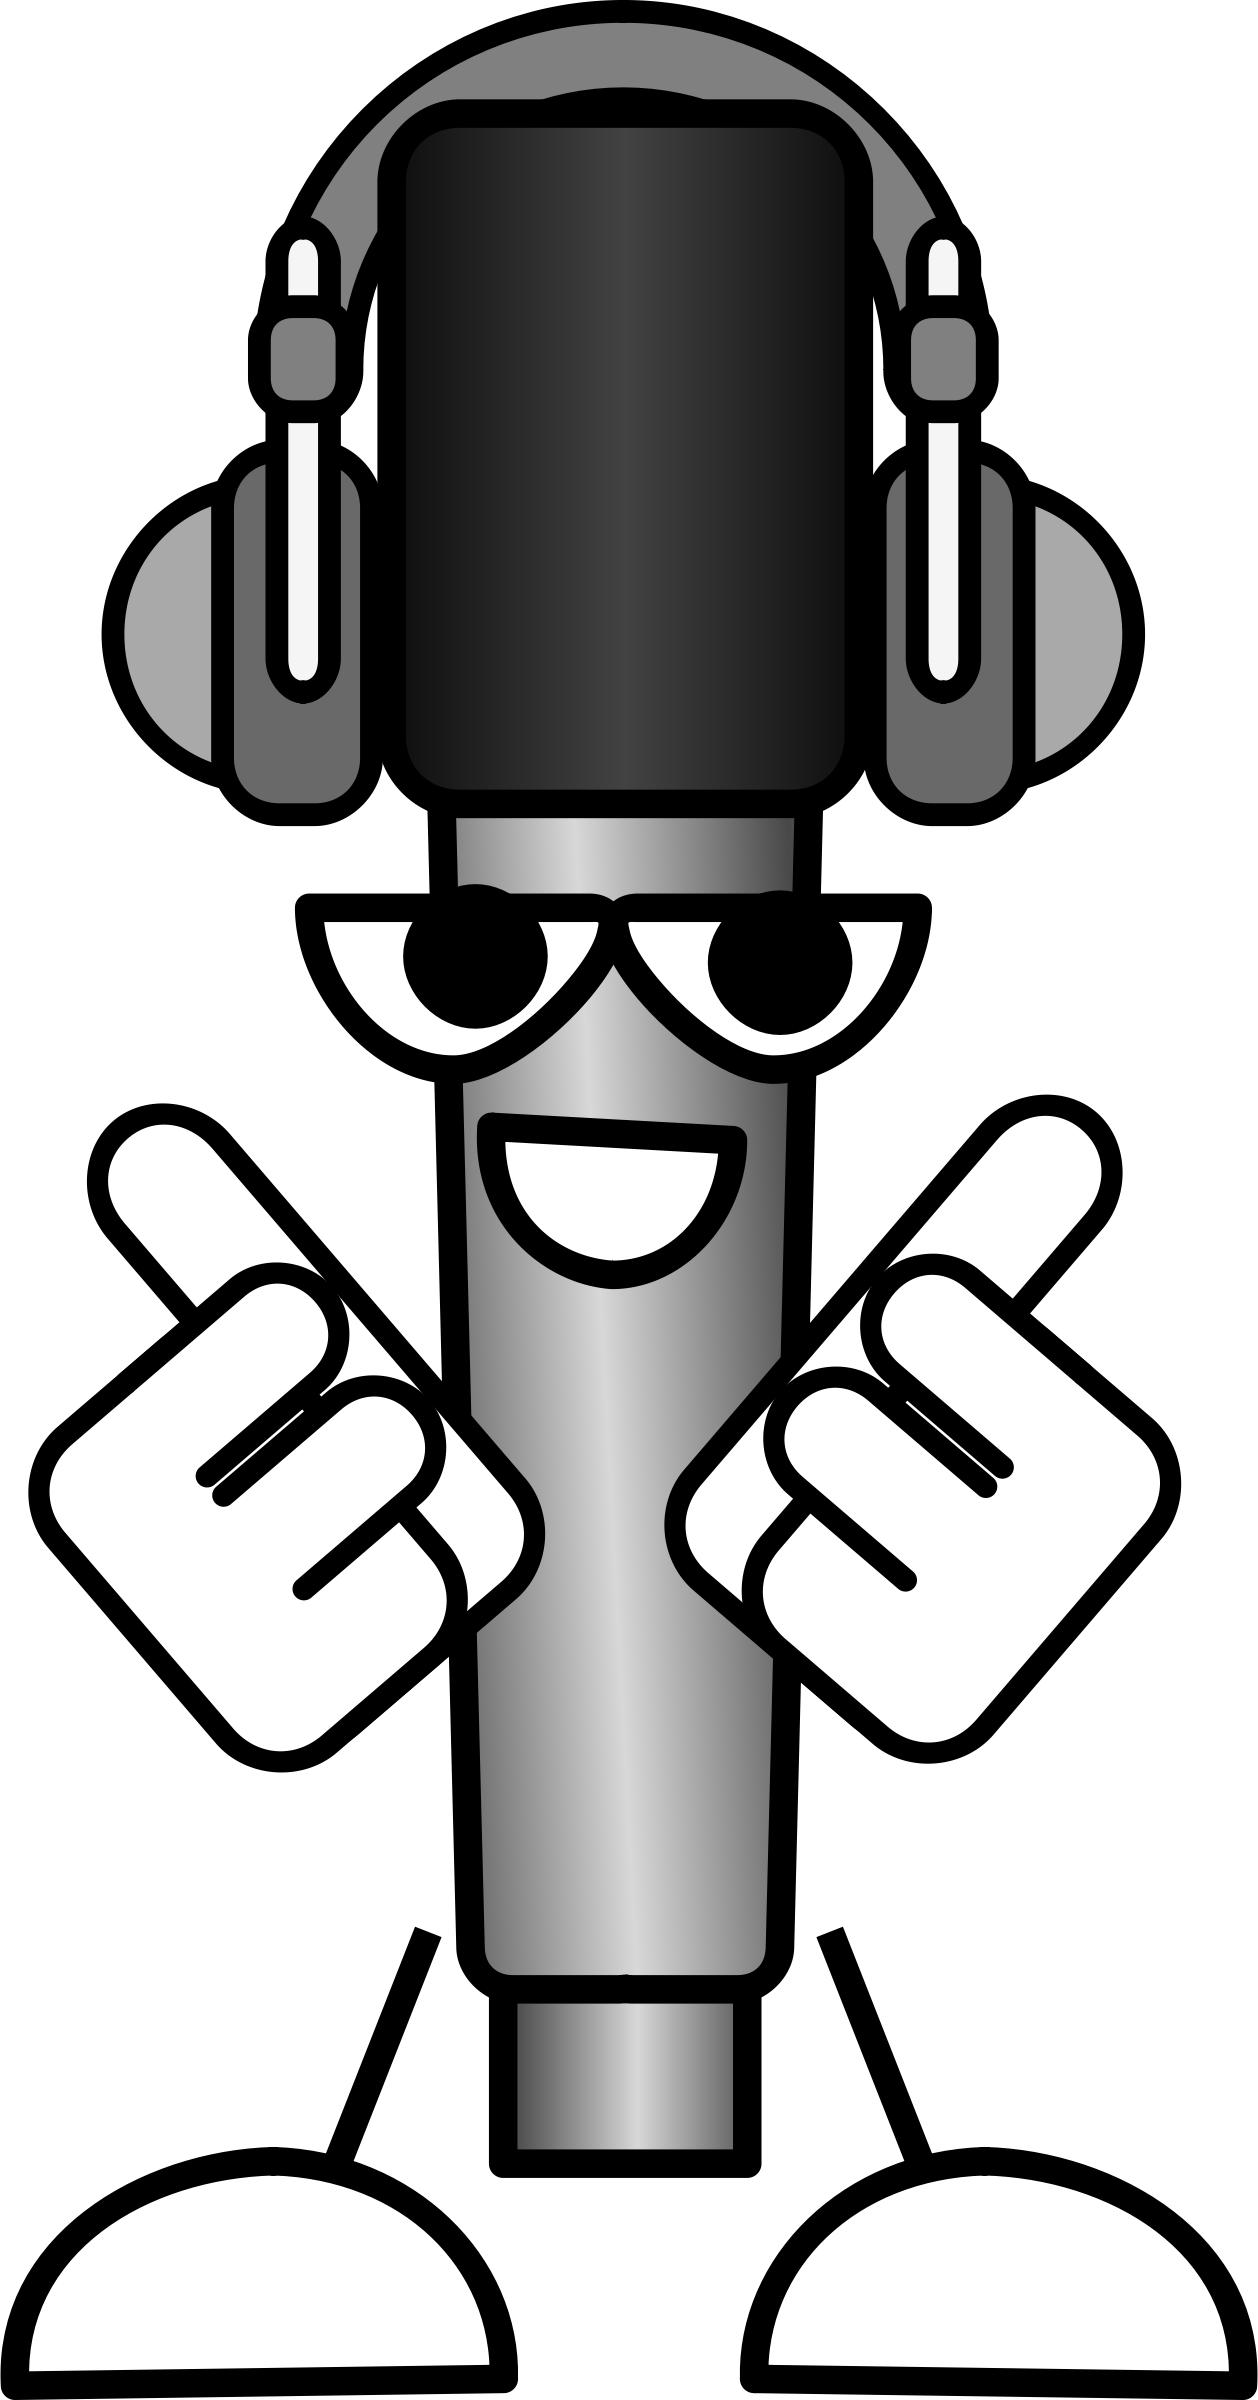 Mike the Mic with Headphones PNG icons